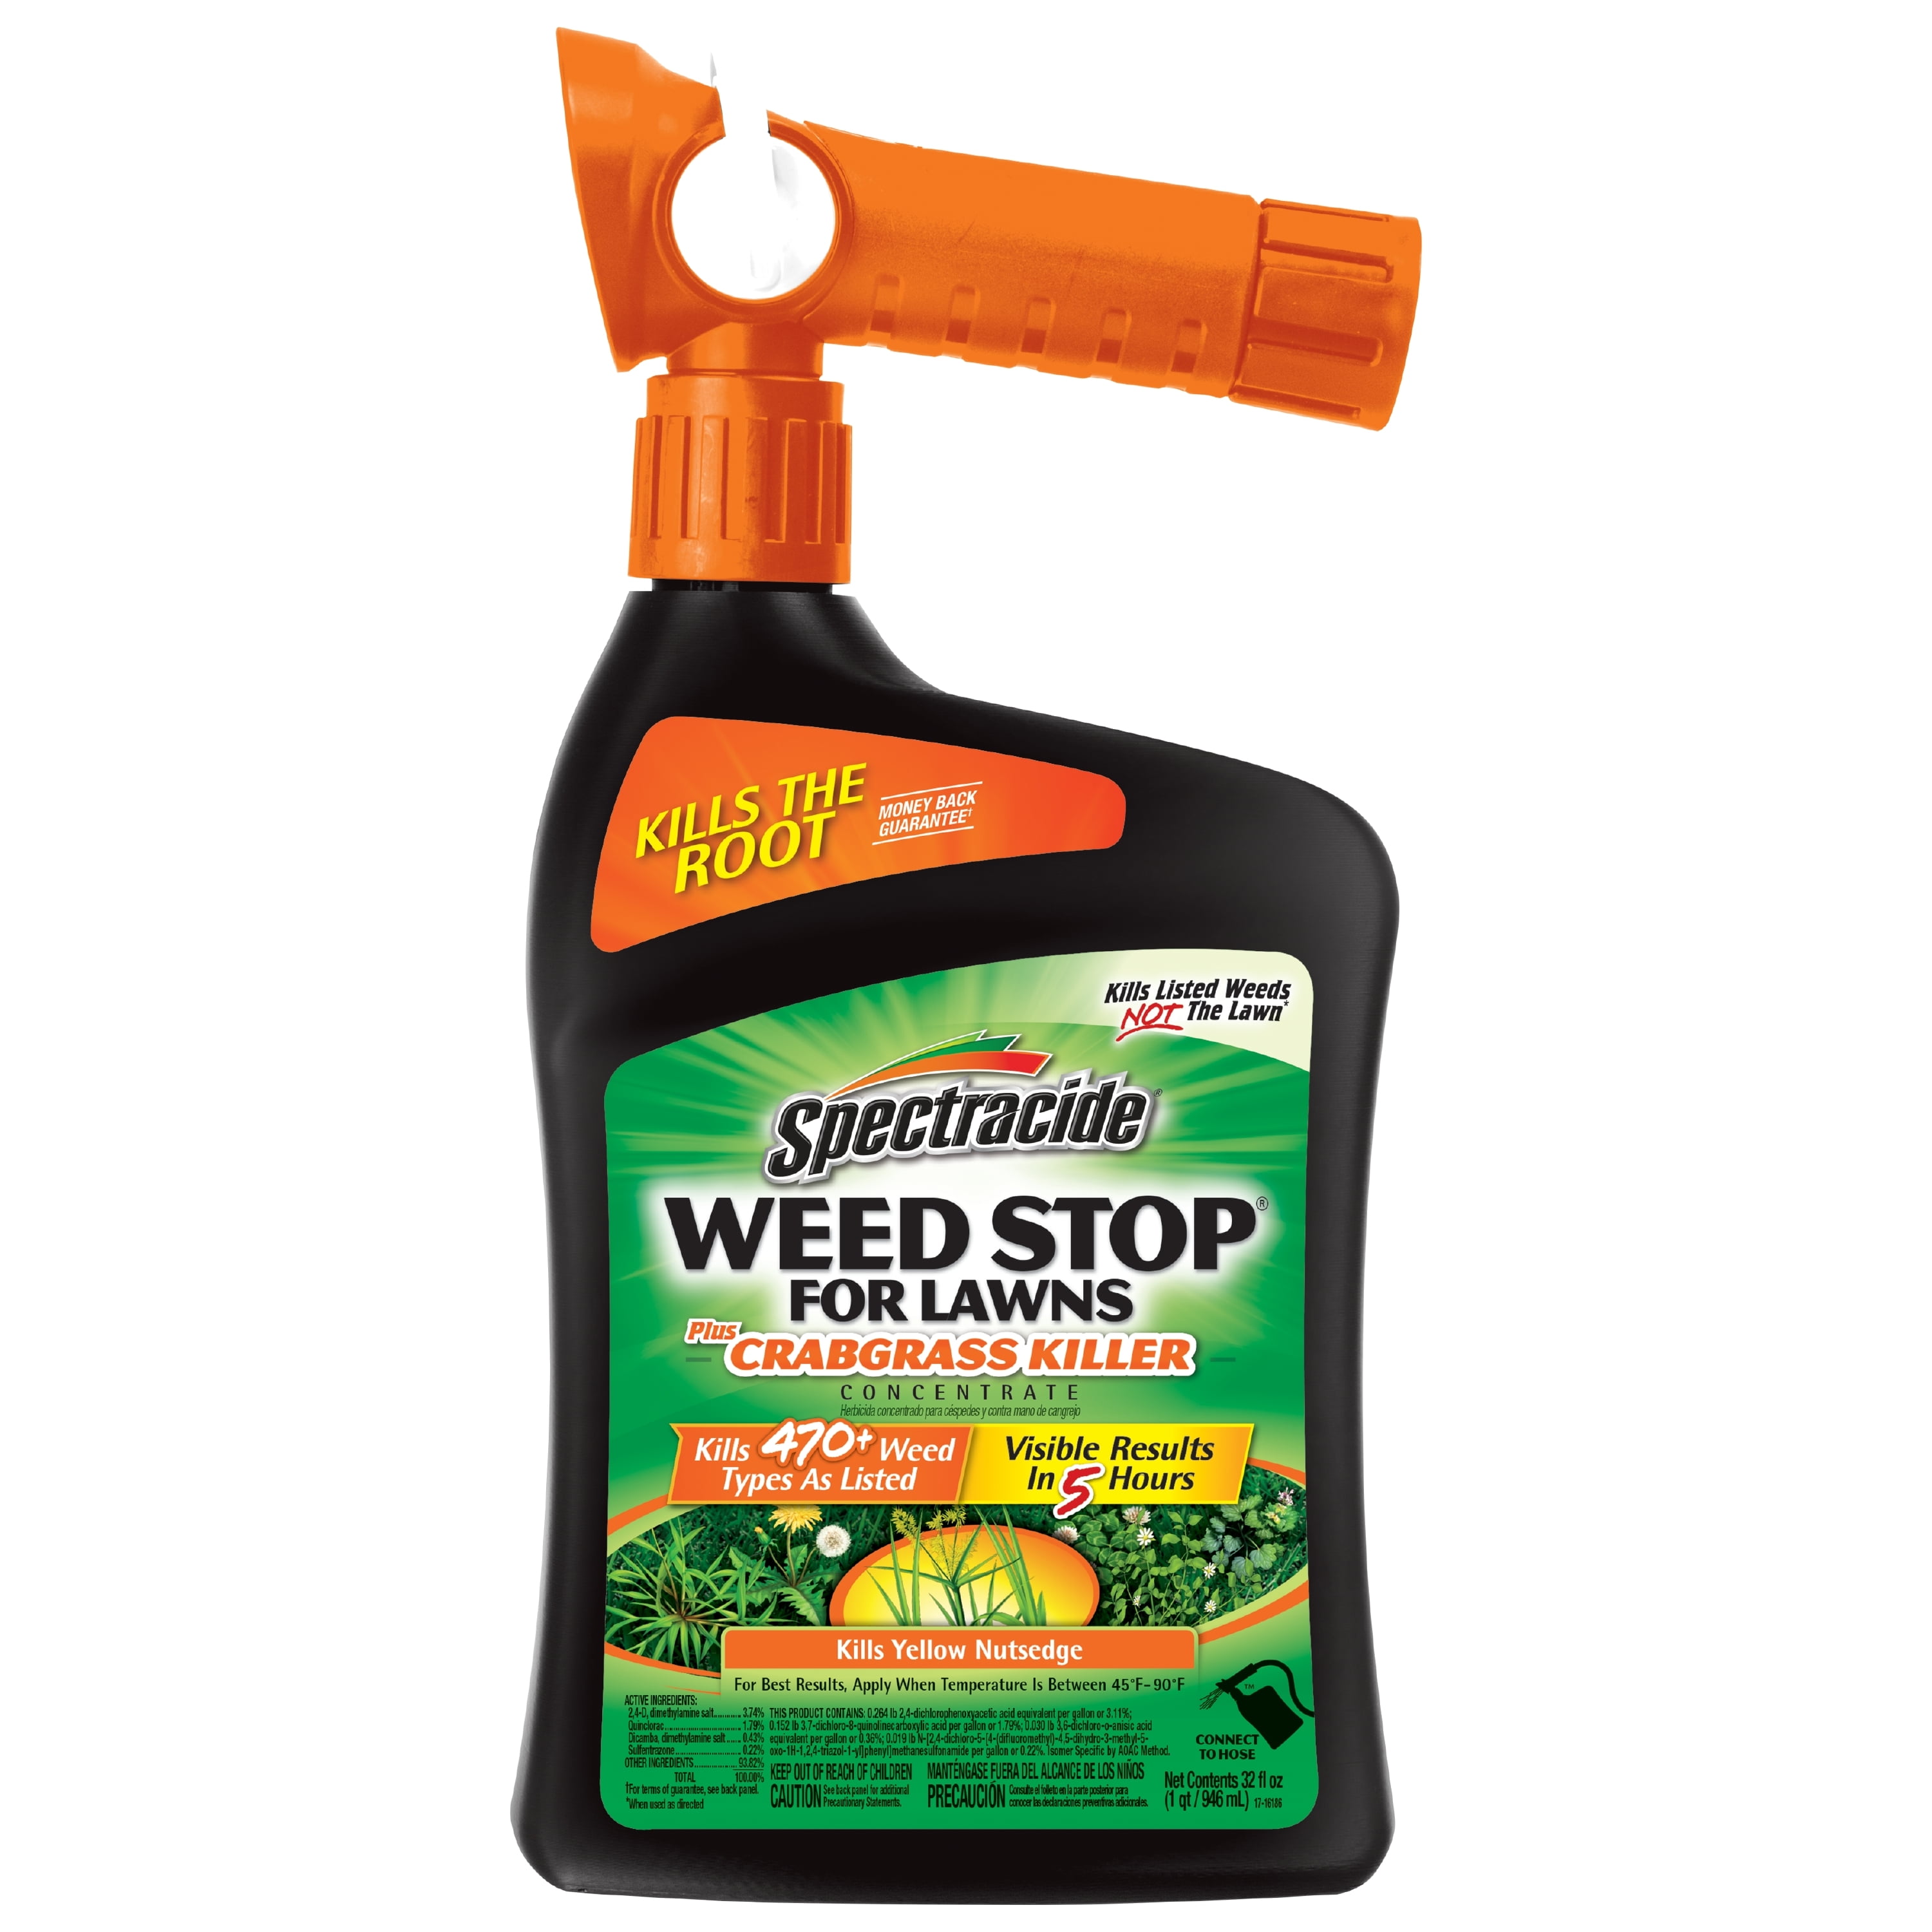 Spectracide Weed Stop for Lawns + Crabgrass Killer 